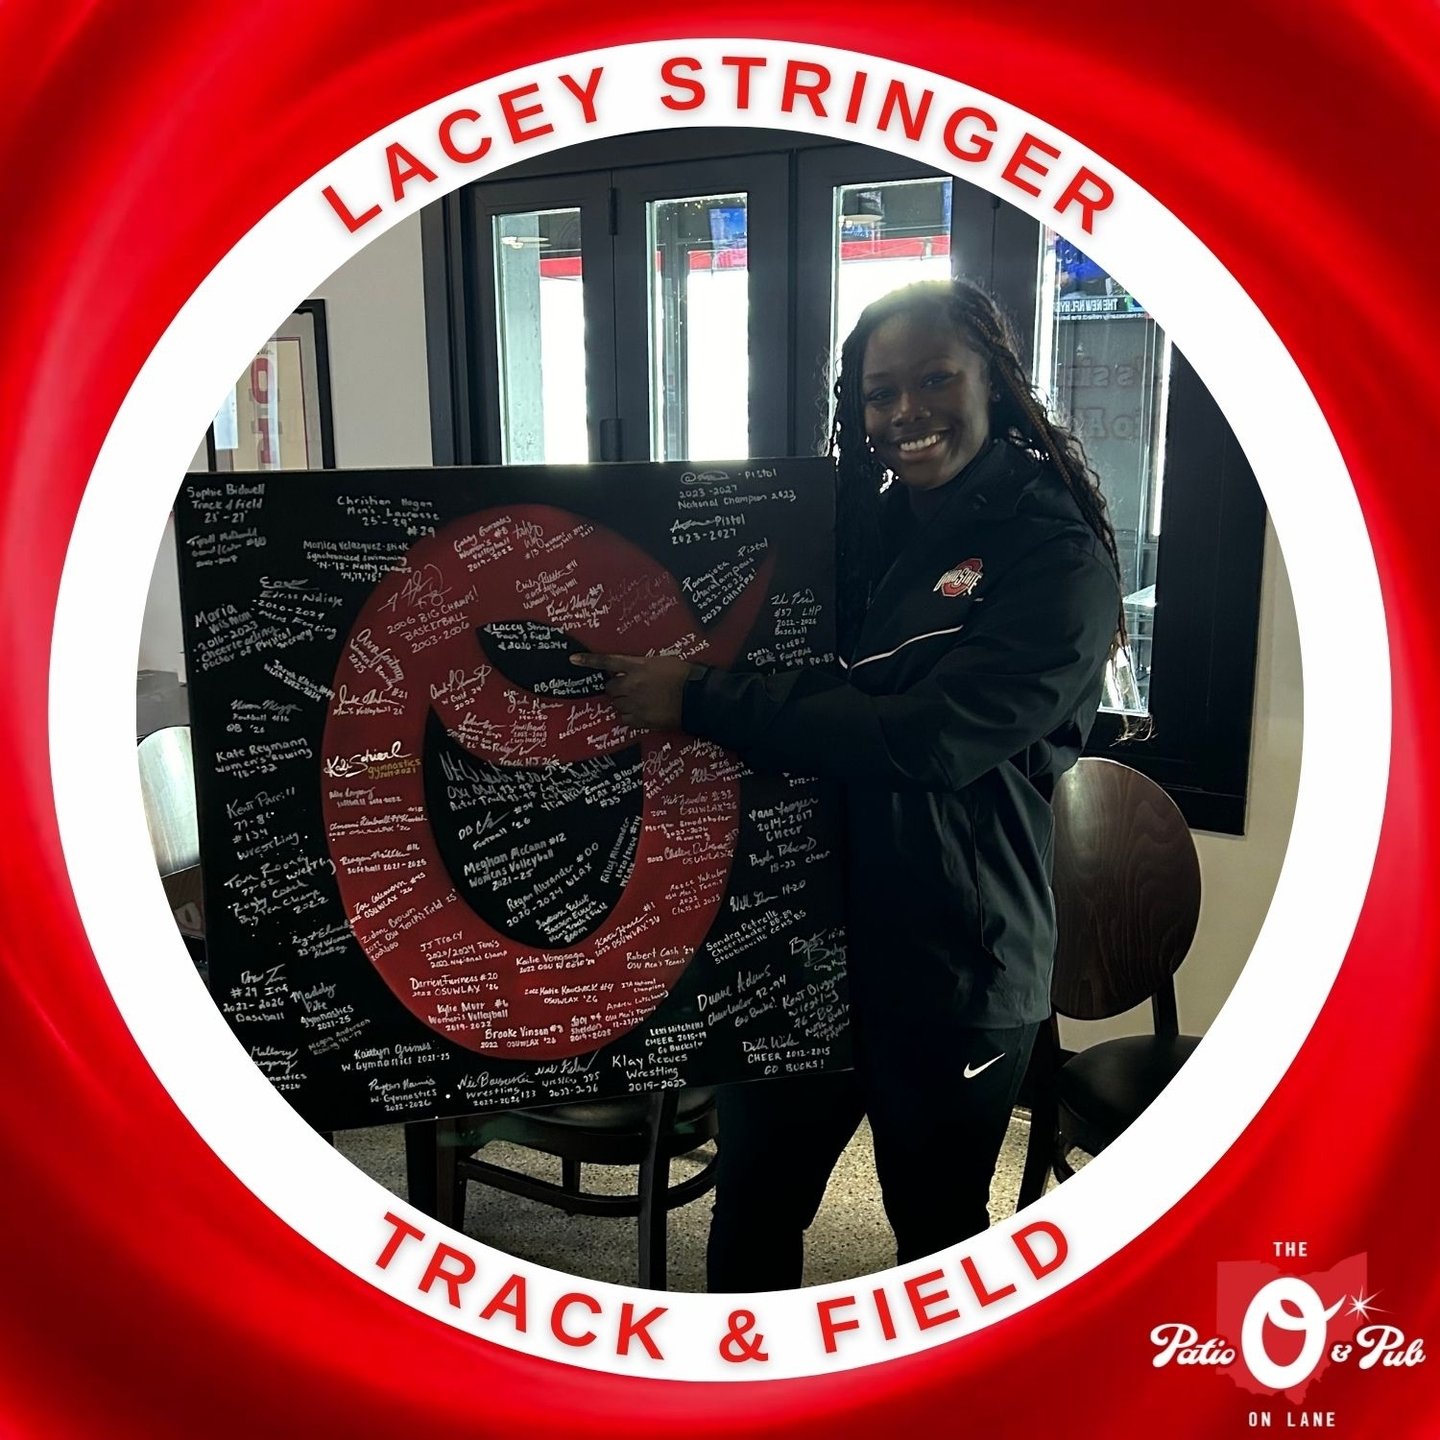 ✨LACEY STRINGER, another OSU champion who is part of The⭕️ family!  #GoBucks #ohiostatetfxc